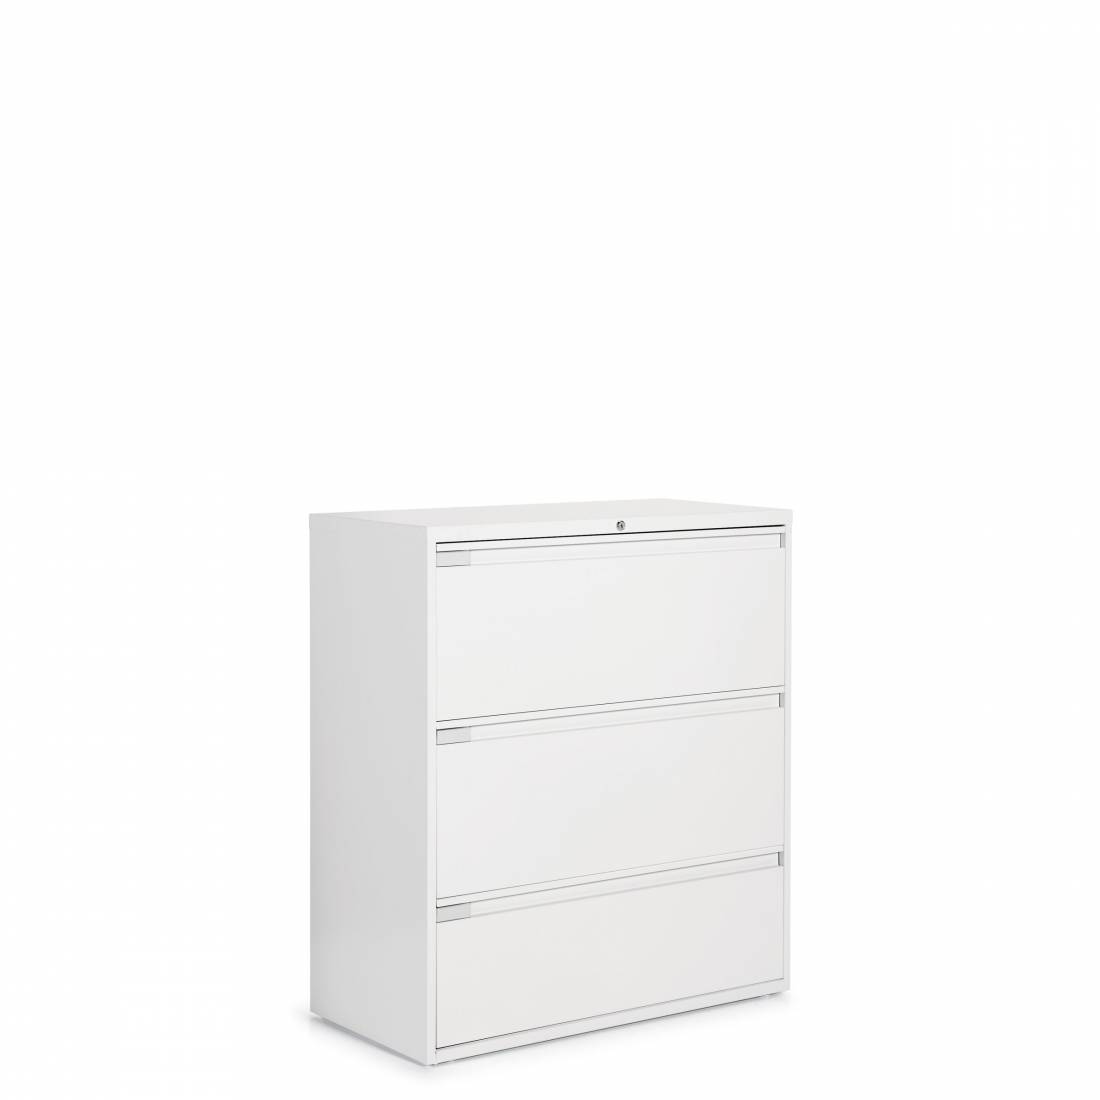 36”W 3 Drawer Lateral File